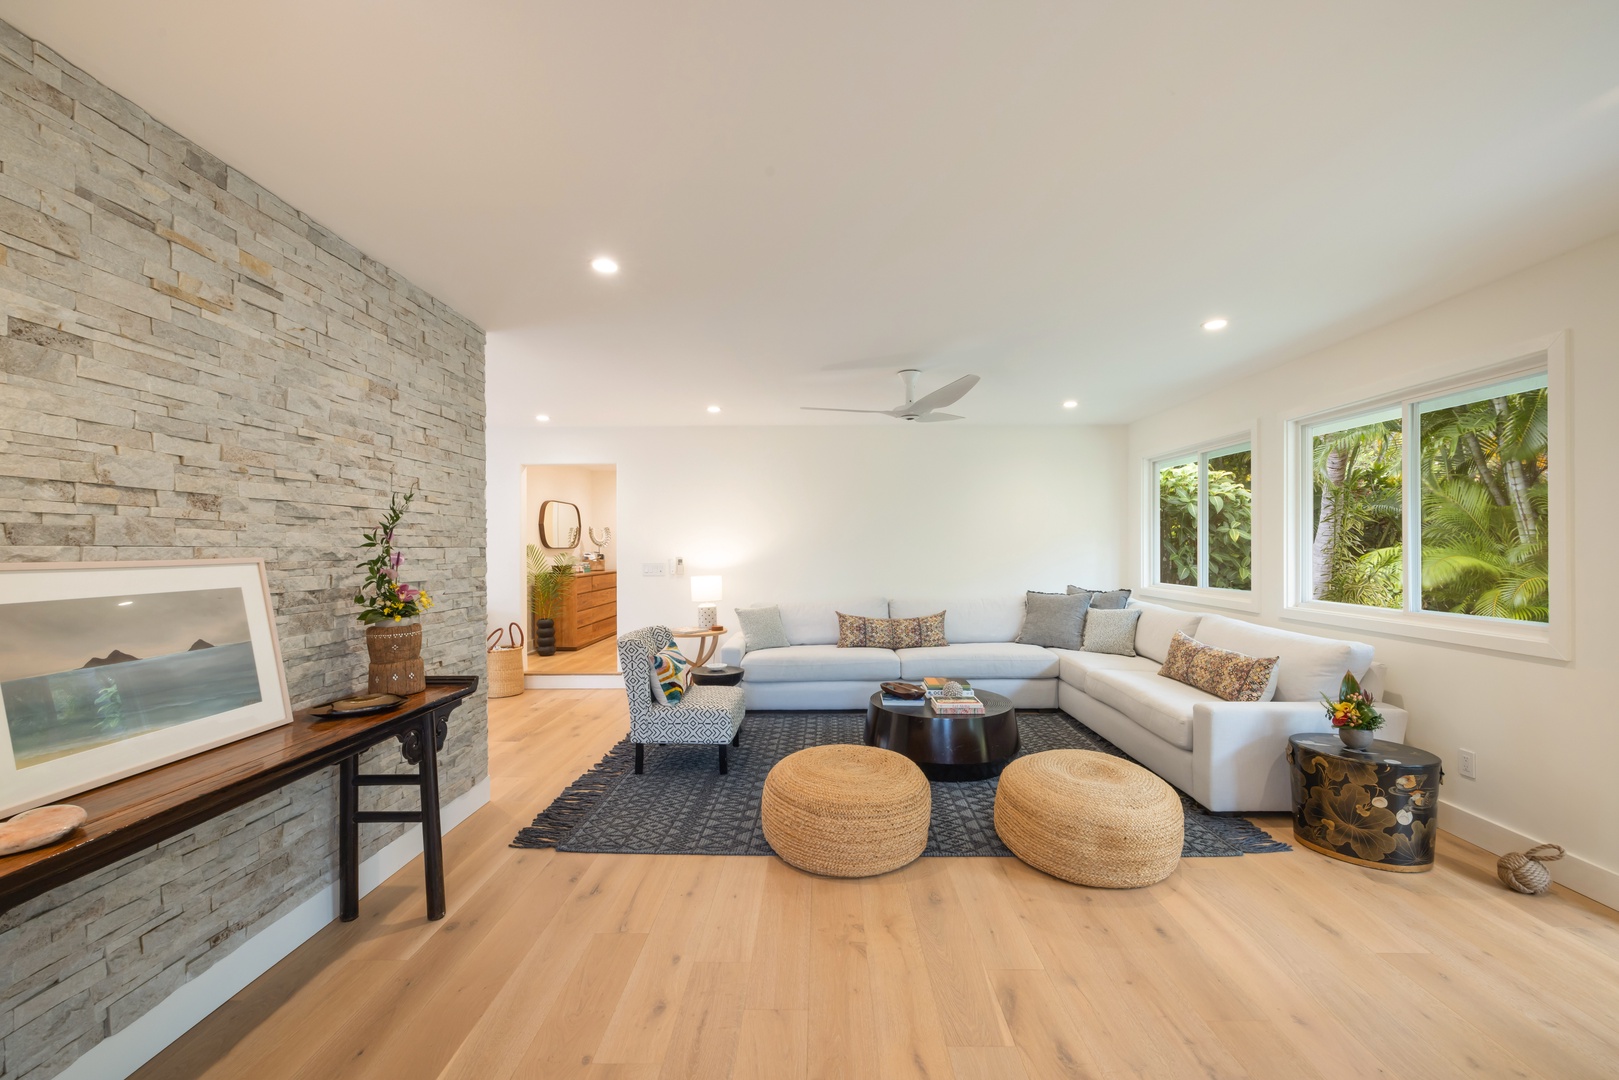 Kailua Vacation Rentals, Lanikai Ola Nani - From plush furnishings to calming hues, our home is a haven of comfort and relaxation.